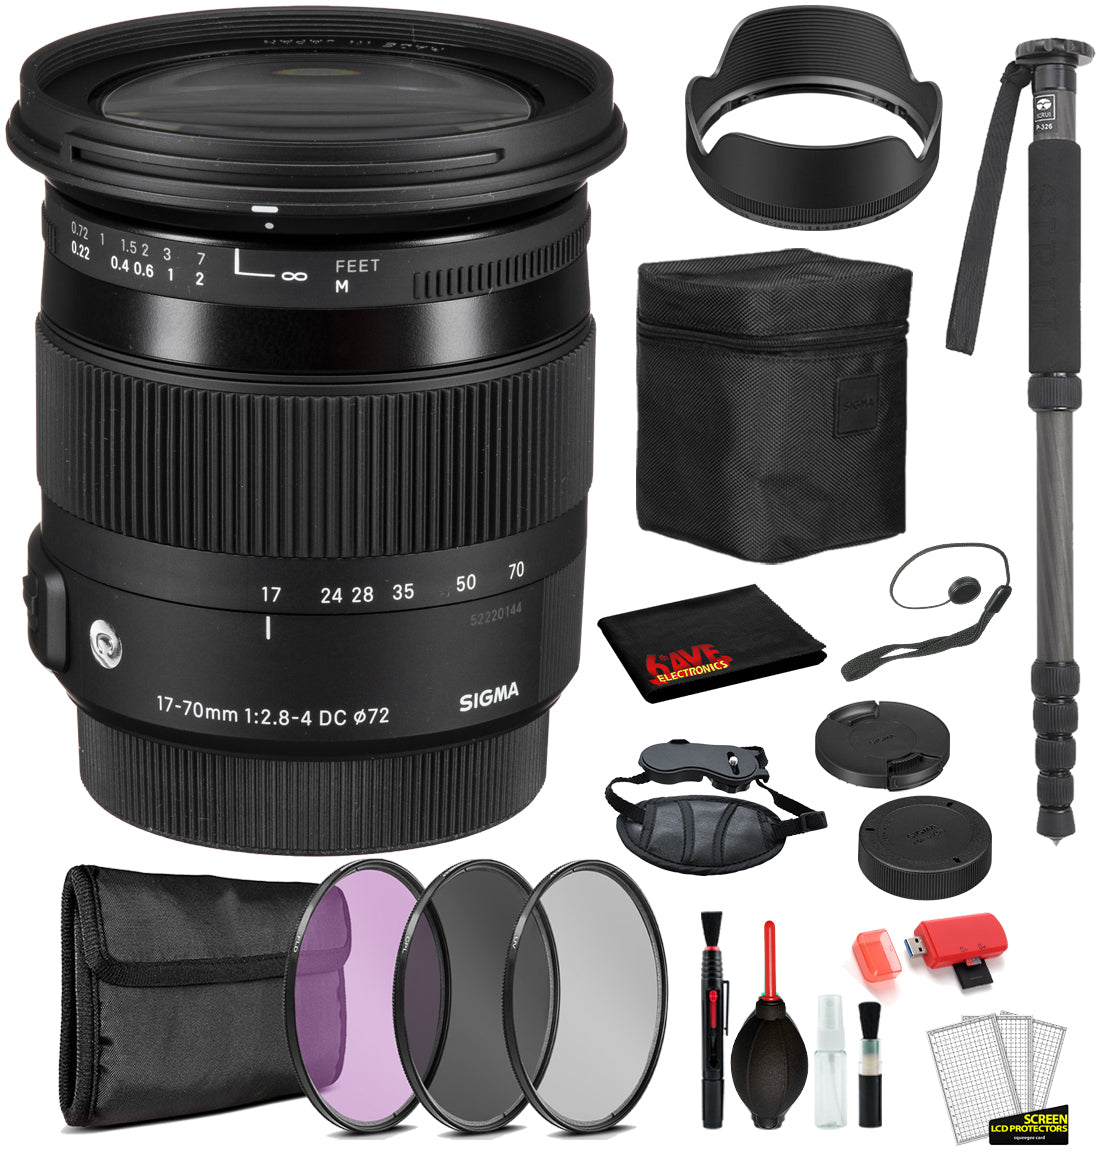 Sigma 17-70mm f/2.8-4 DC Macro OS HSM Contemporary Lens for Nikon F with Bundle: Monopod, 3PC Filter Kit + More